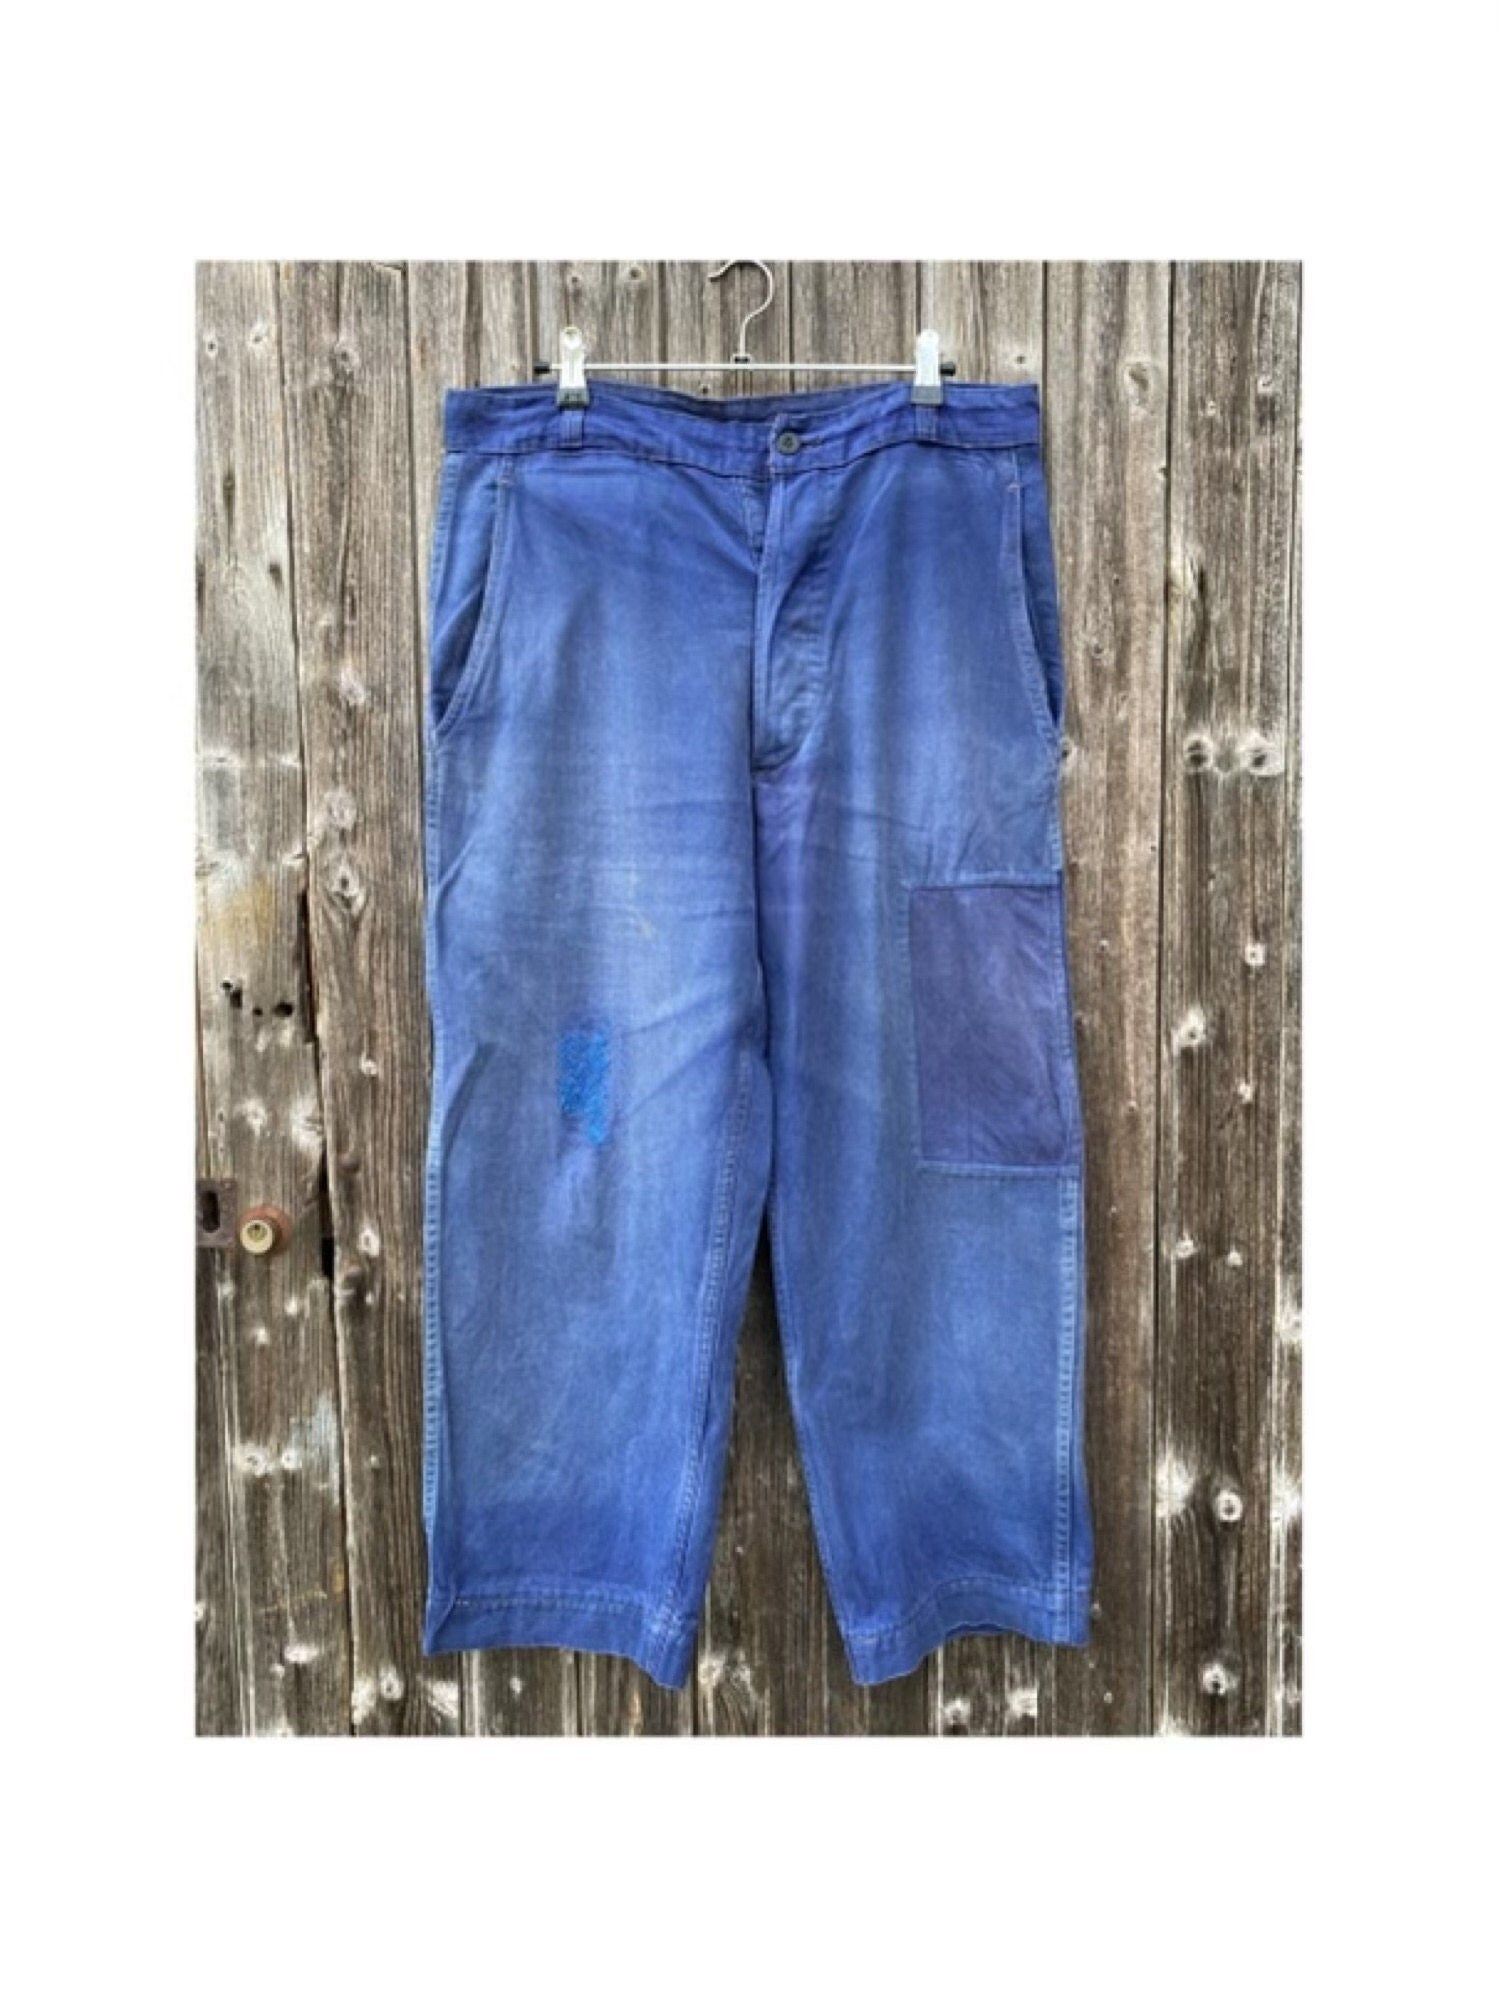 1960s French Work Pants Faded Size M - Etsy